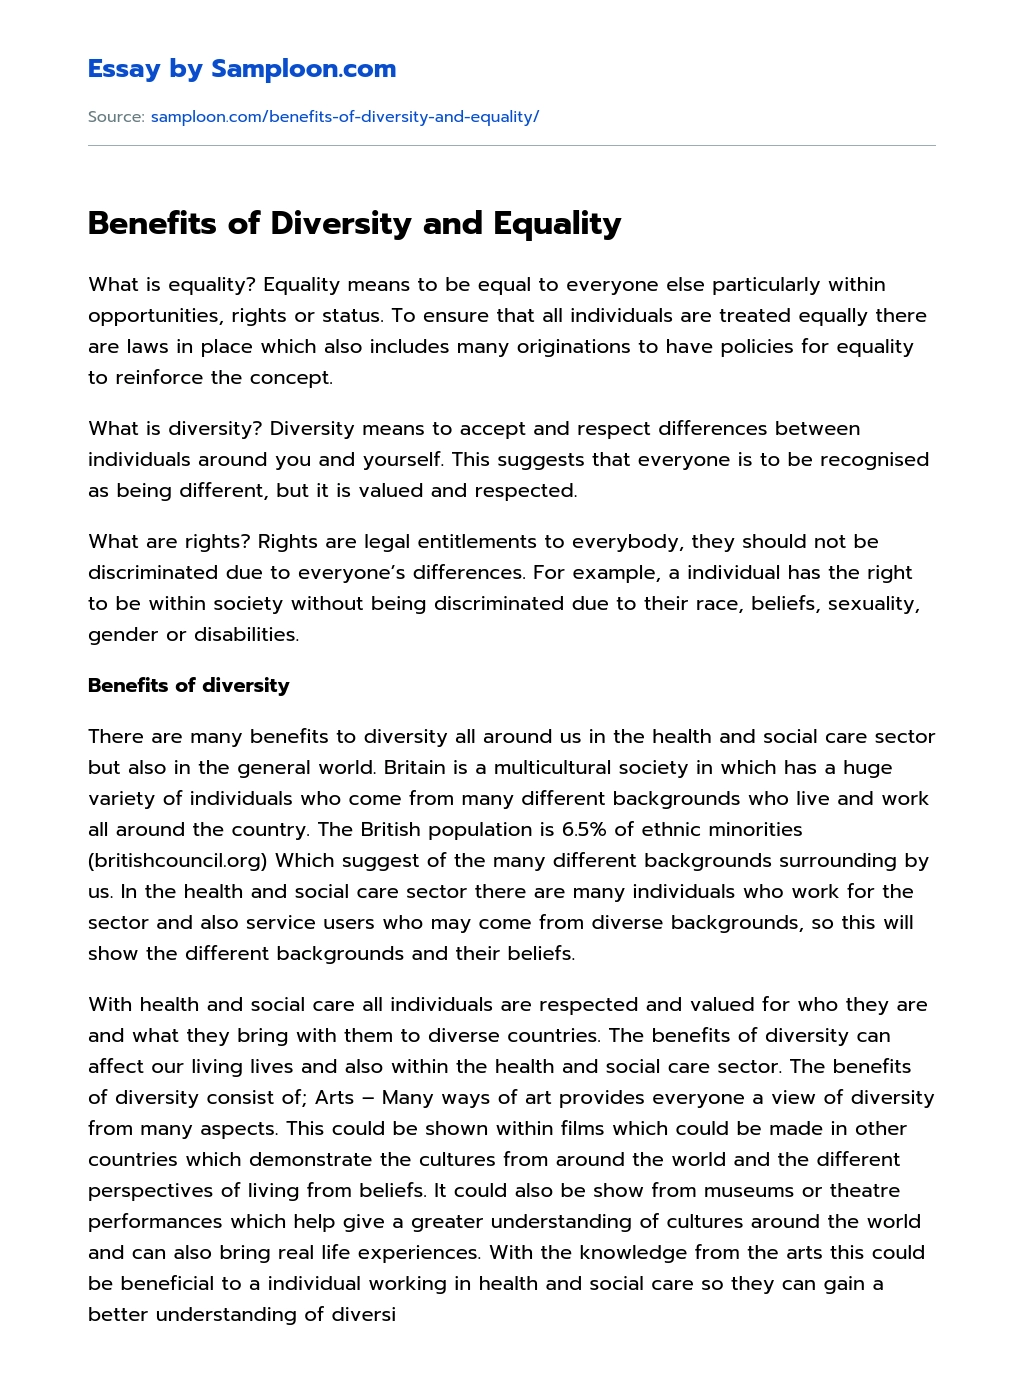 Benefits of Diversity and Equality essay